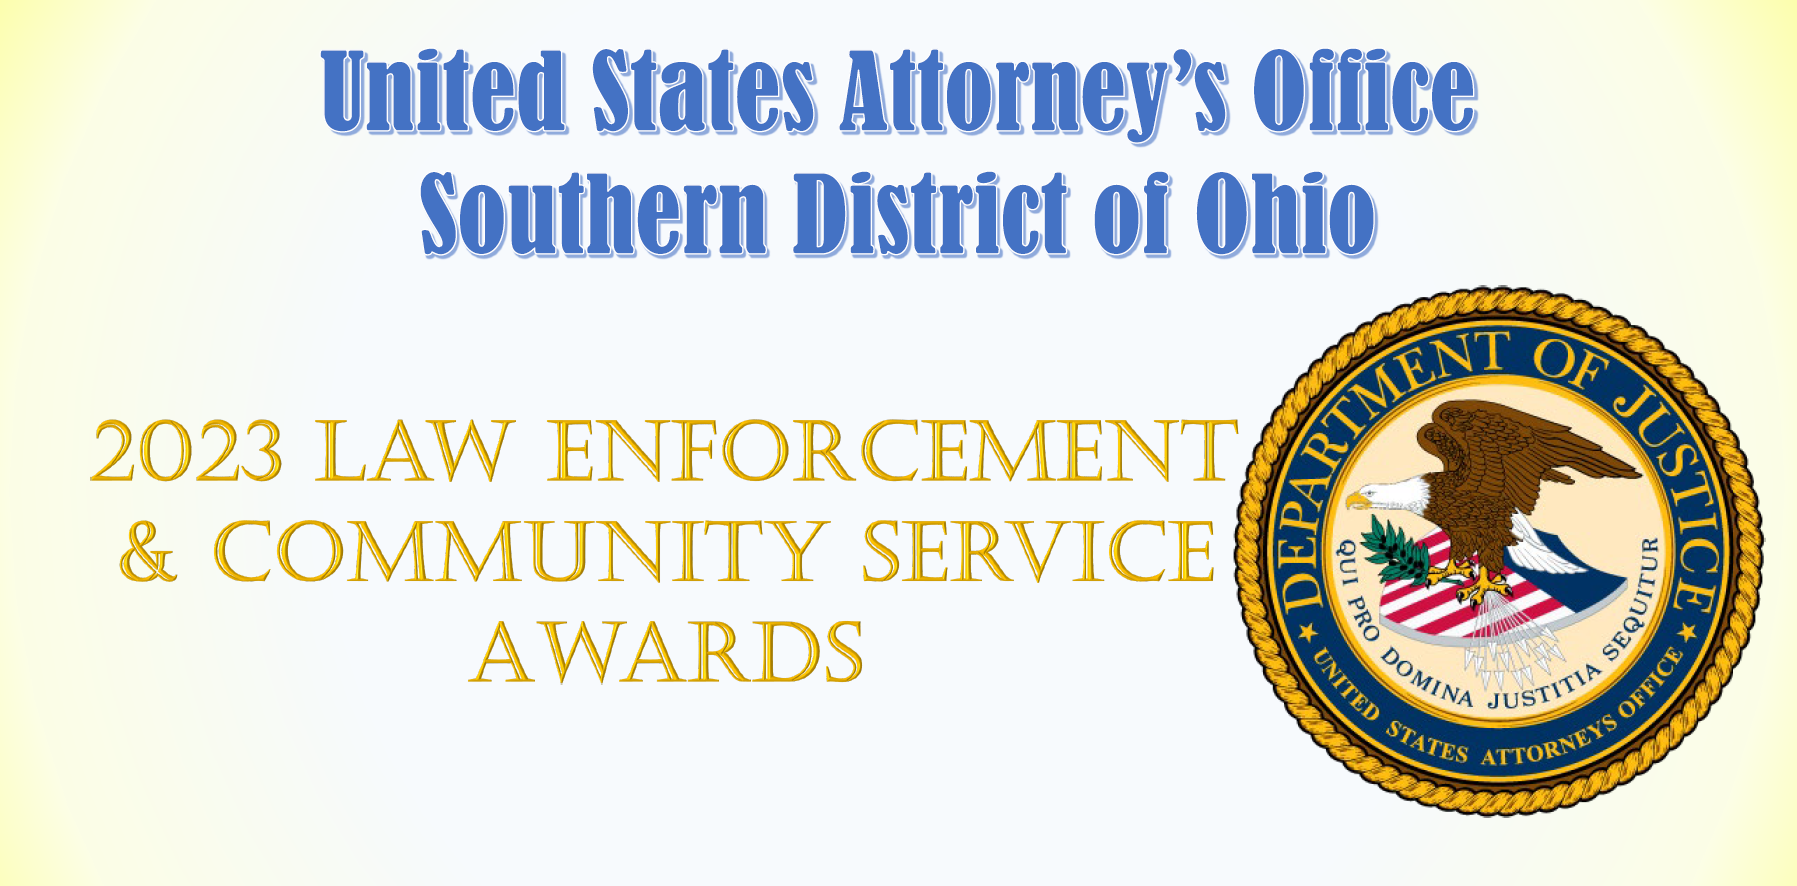 United States Attorney's Office 2023 Law Enforcement & Community Service Awards